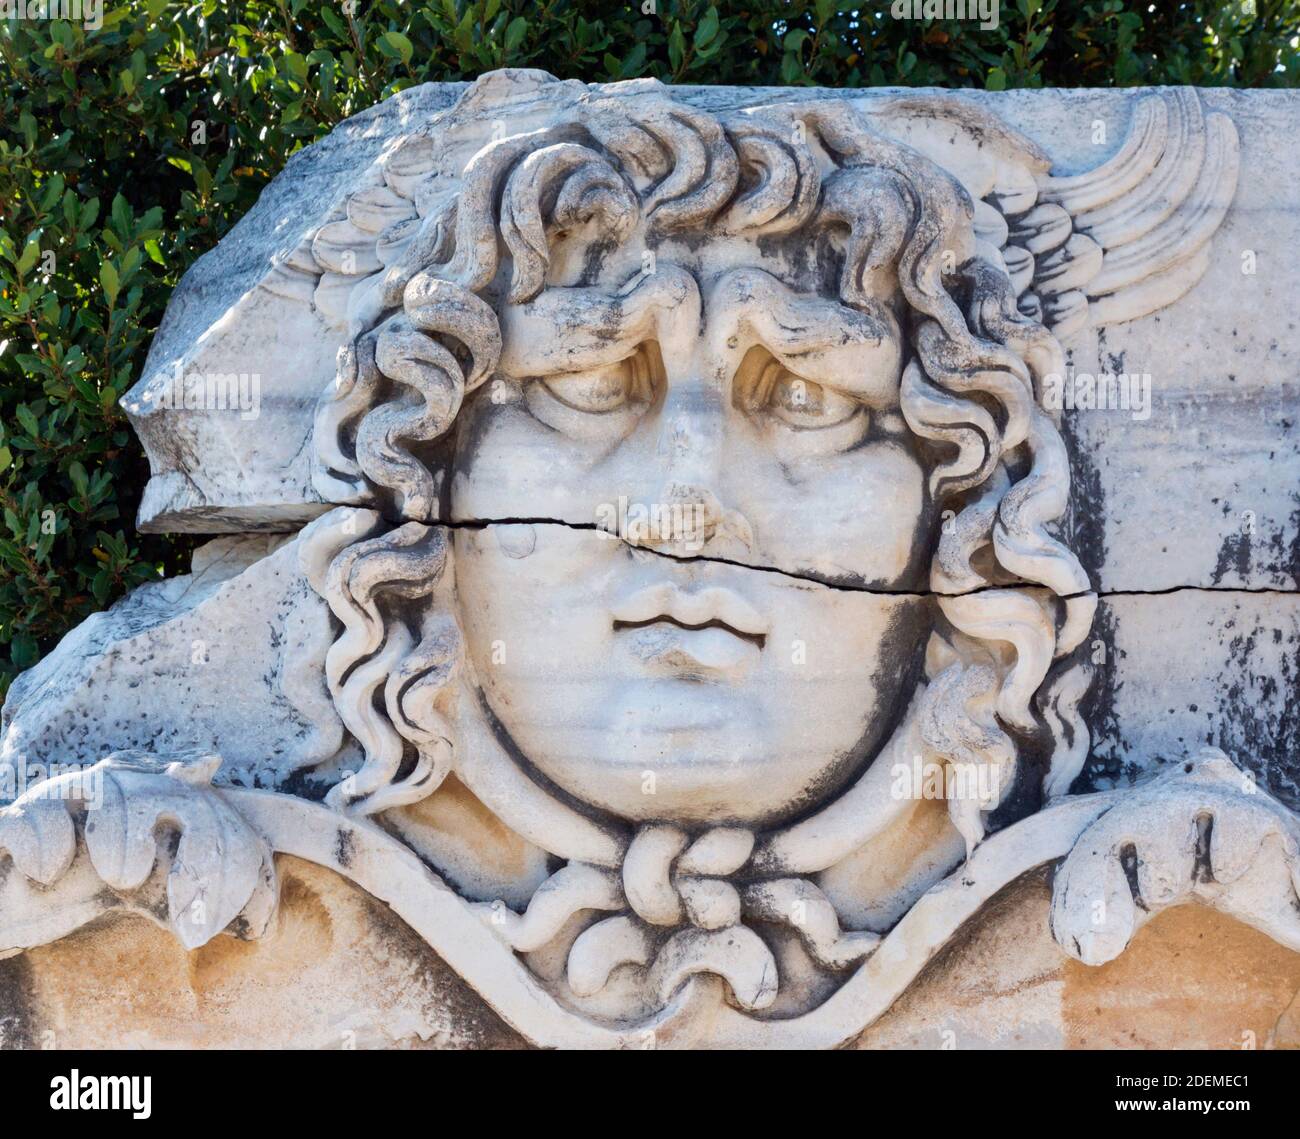 Ruins of ancient Didyma at Didim, Aydin Province, Turkey.  Carved relief of the head of Medusa. Stock Photo